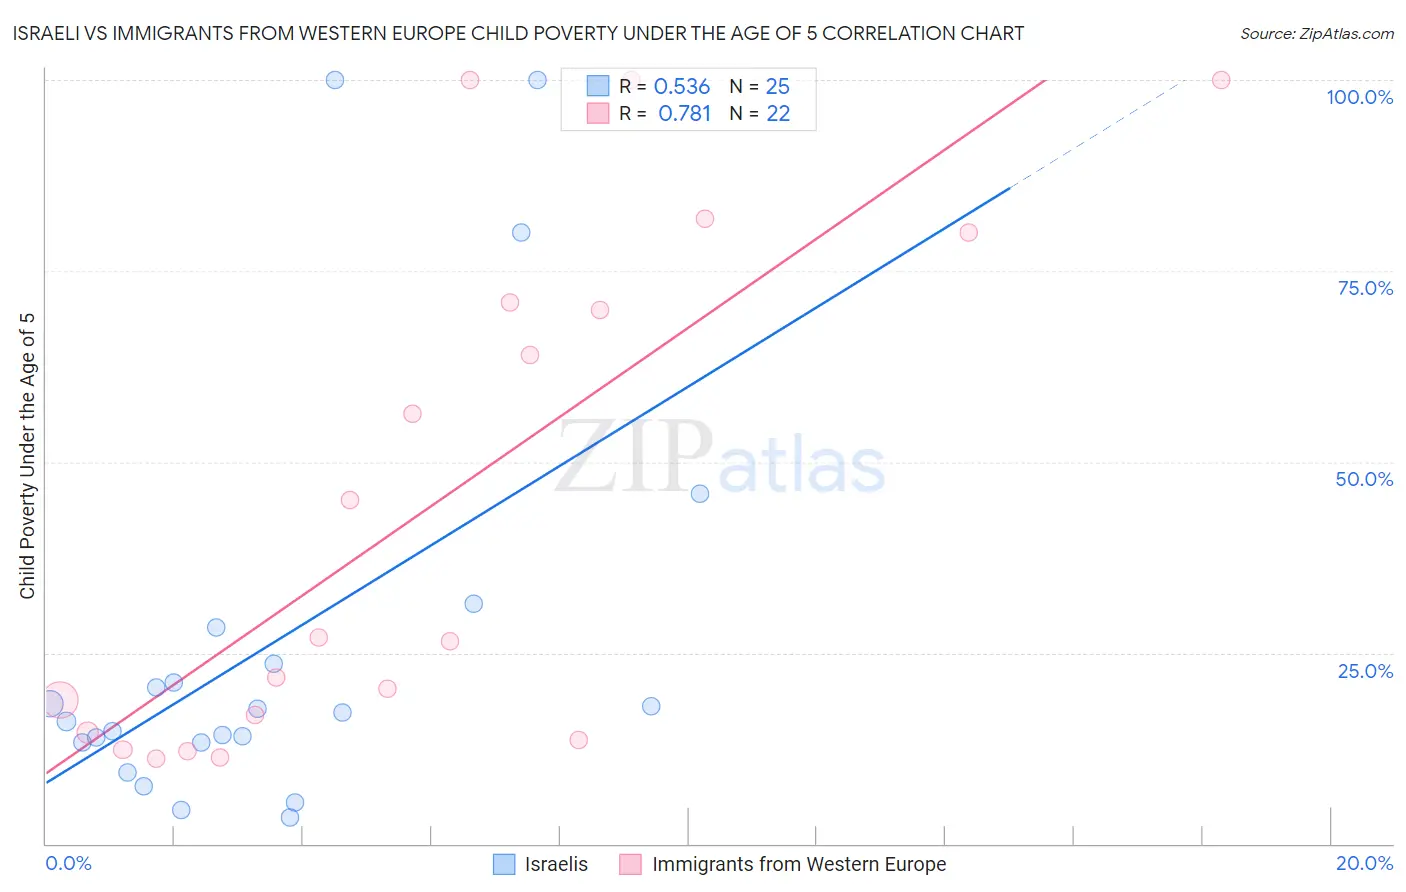 Israeli vs Immigrants from Western Europe Child Poverty Under the Age of 5